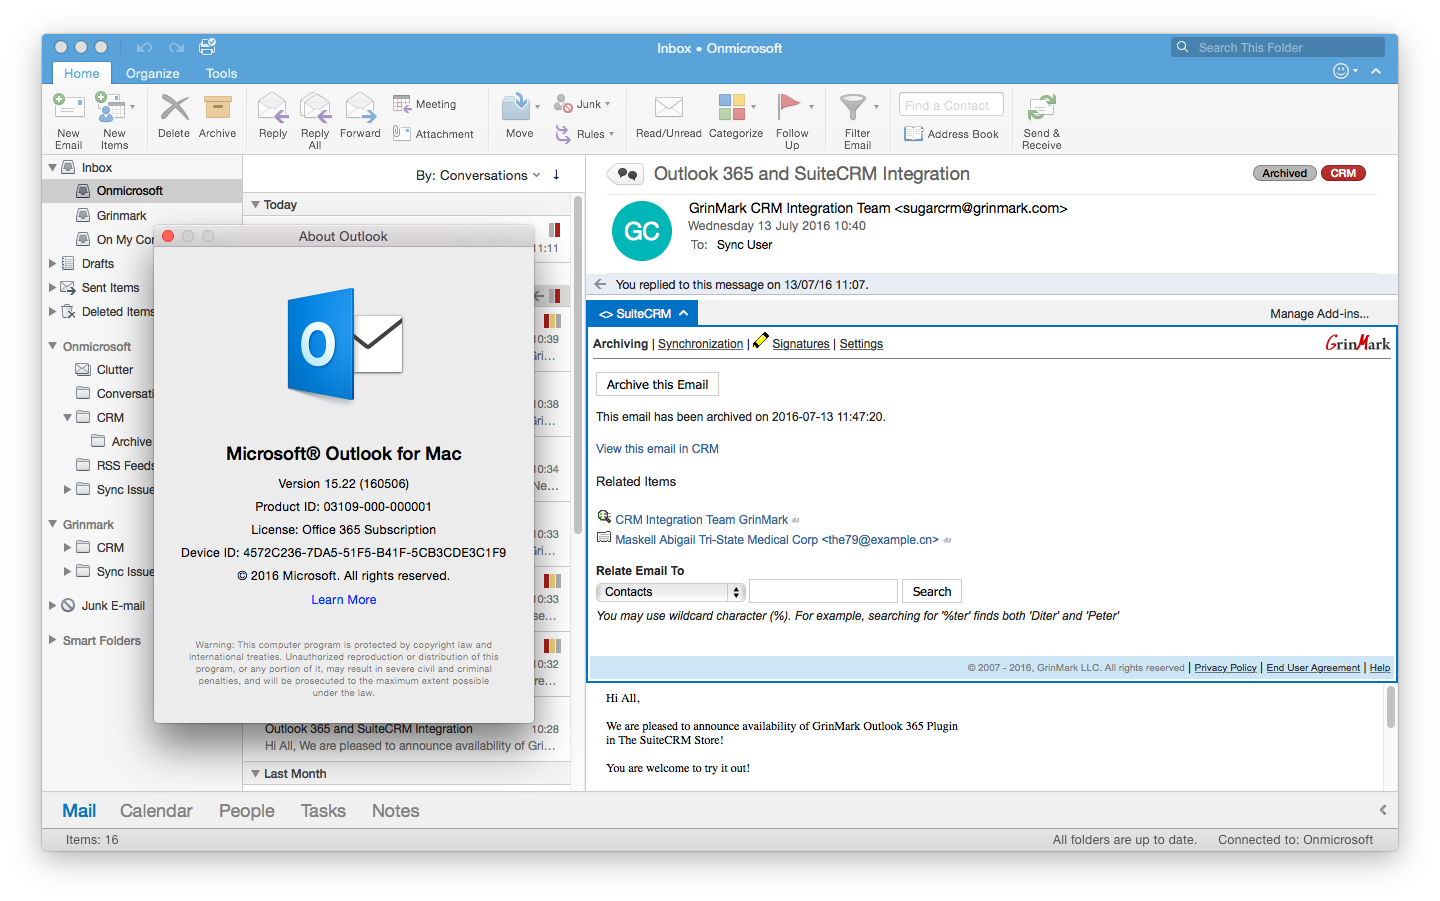 outlook for mac 2021